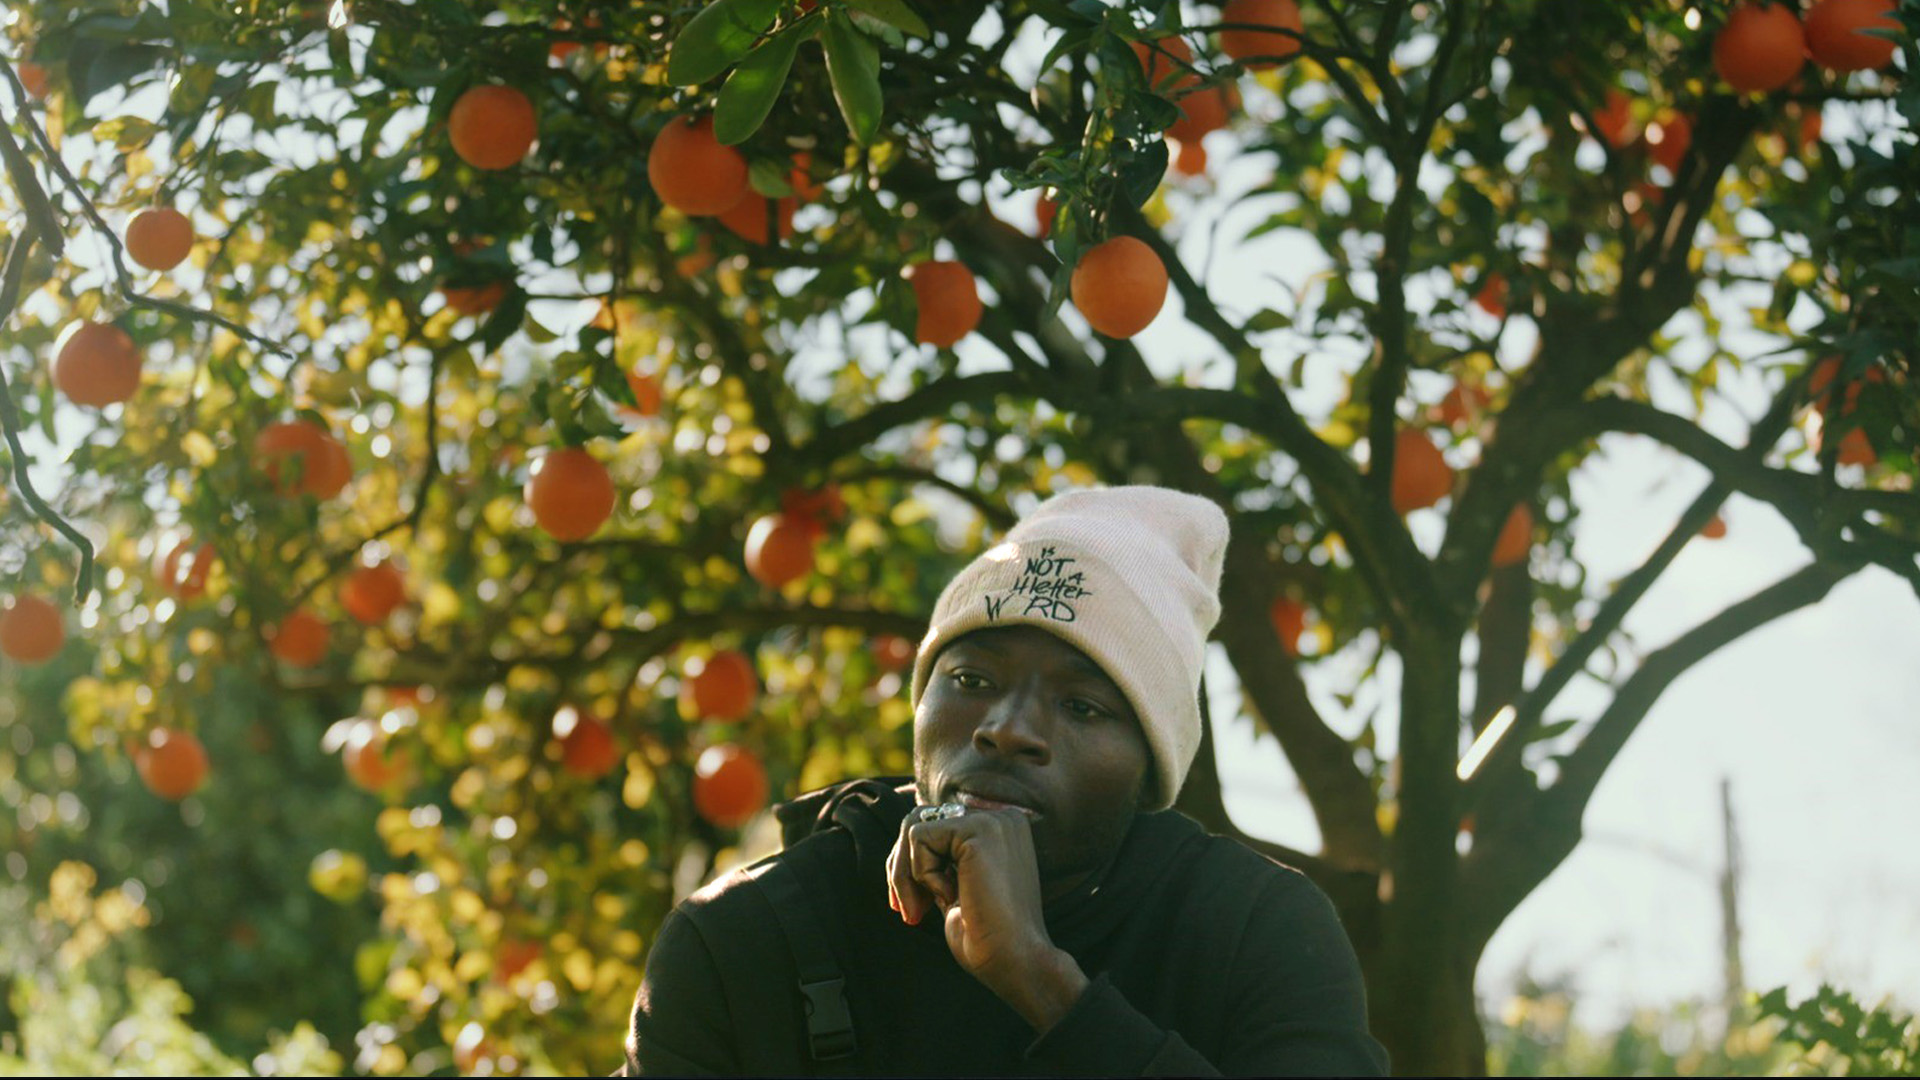 A man sits in front of an orange tree and looks thoughtfully into the distance.